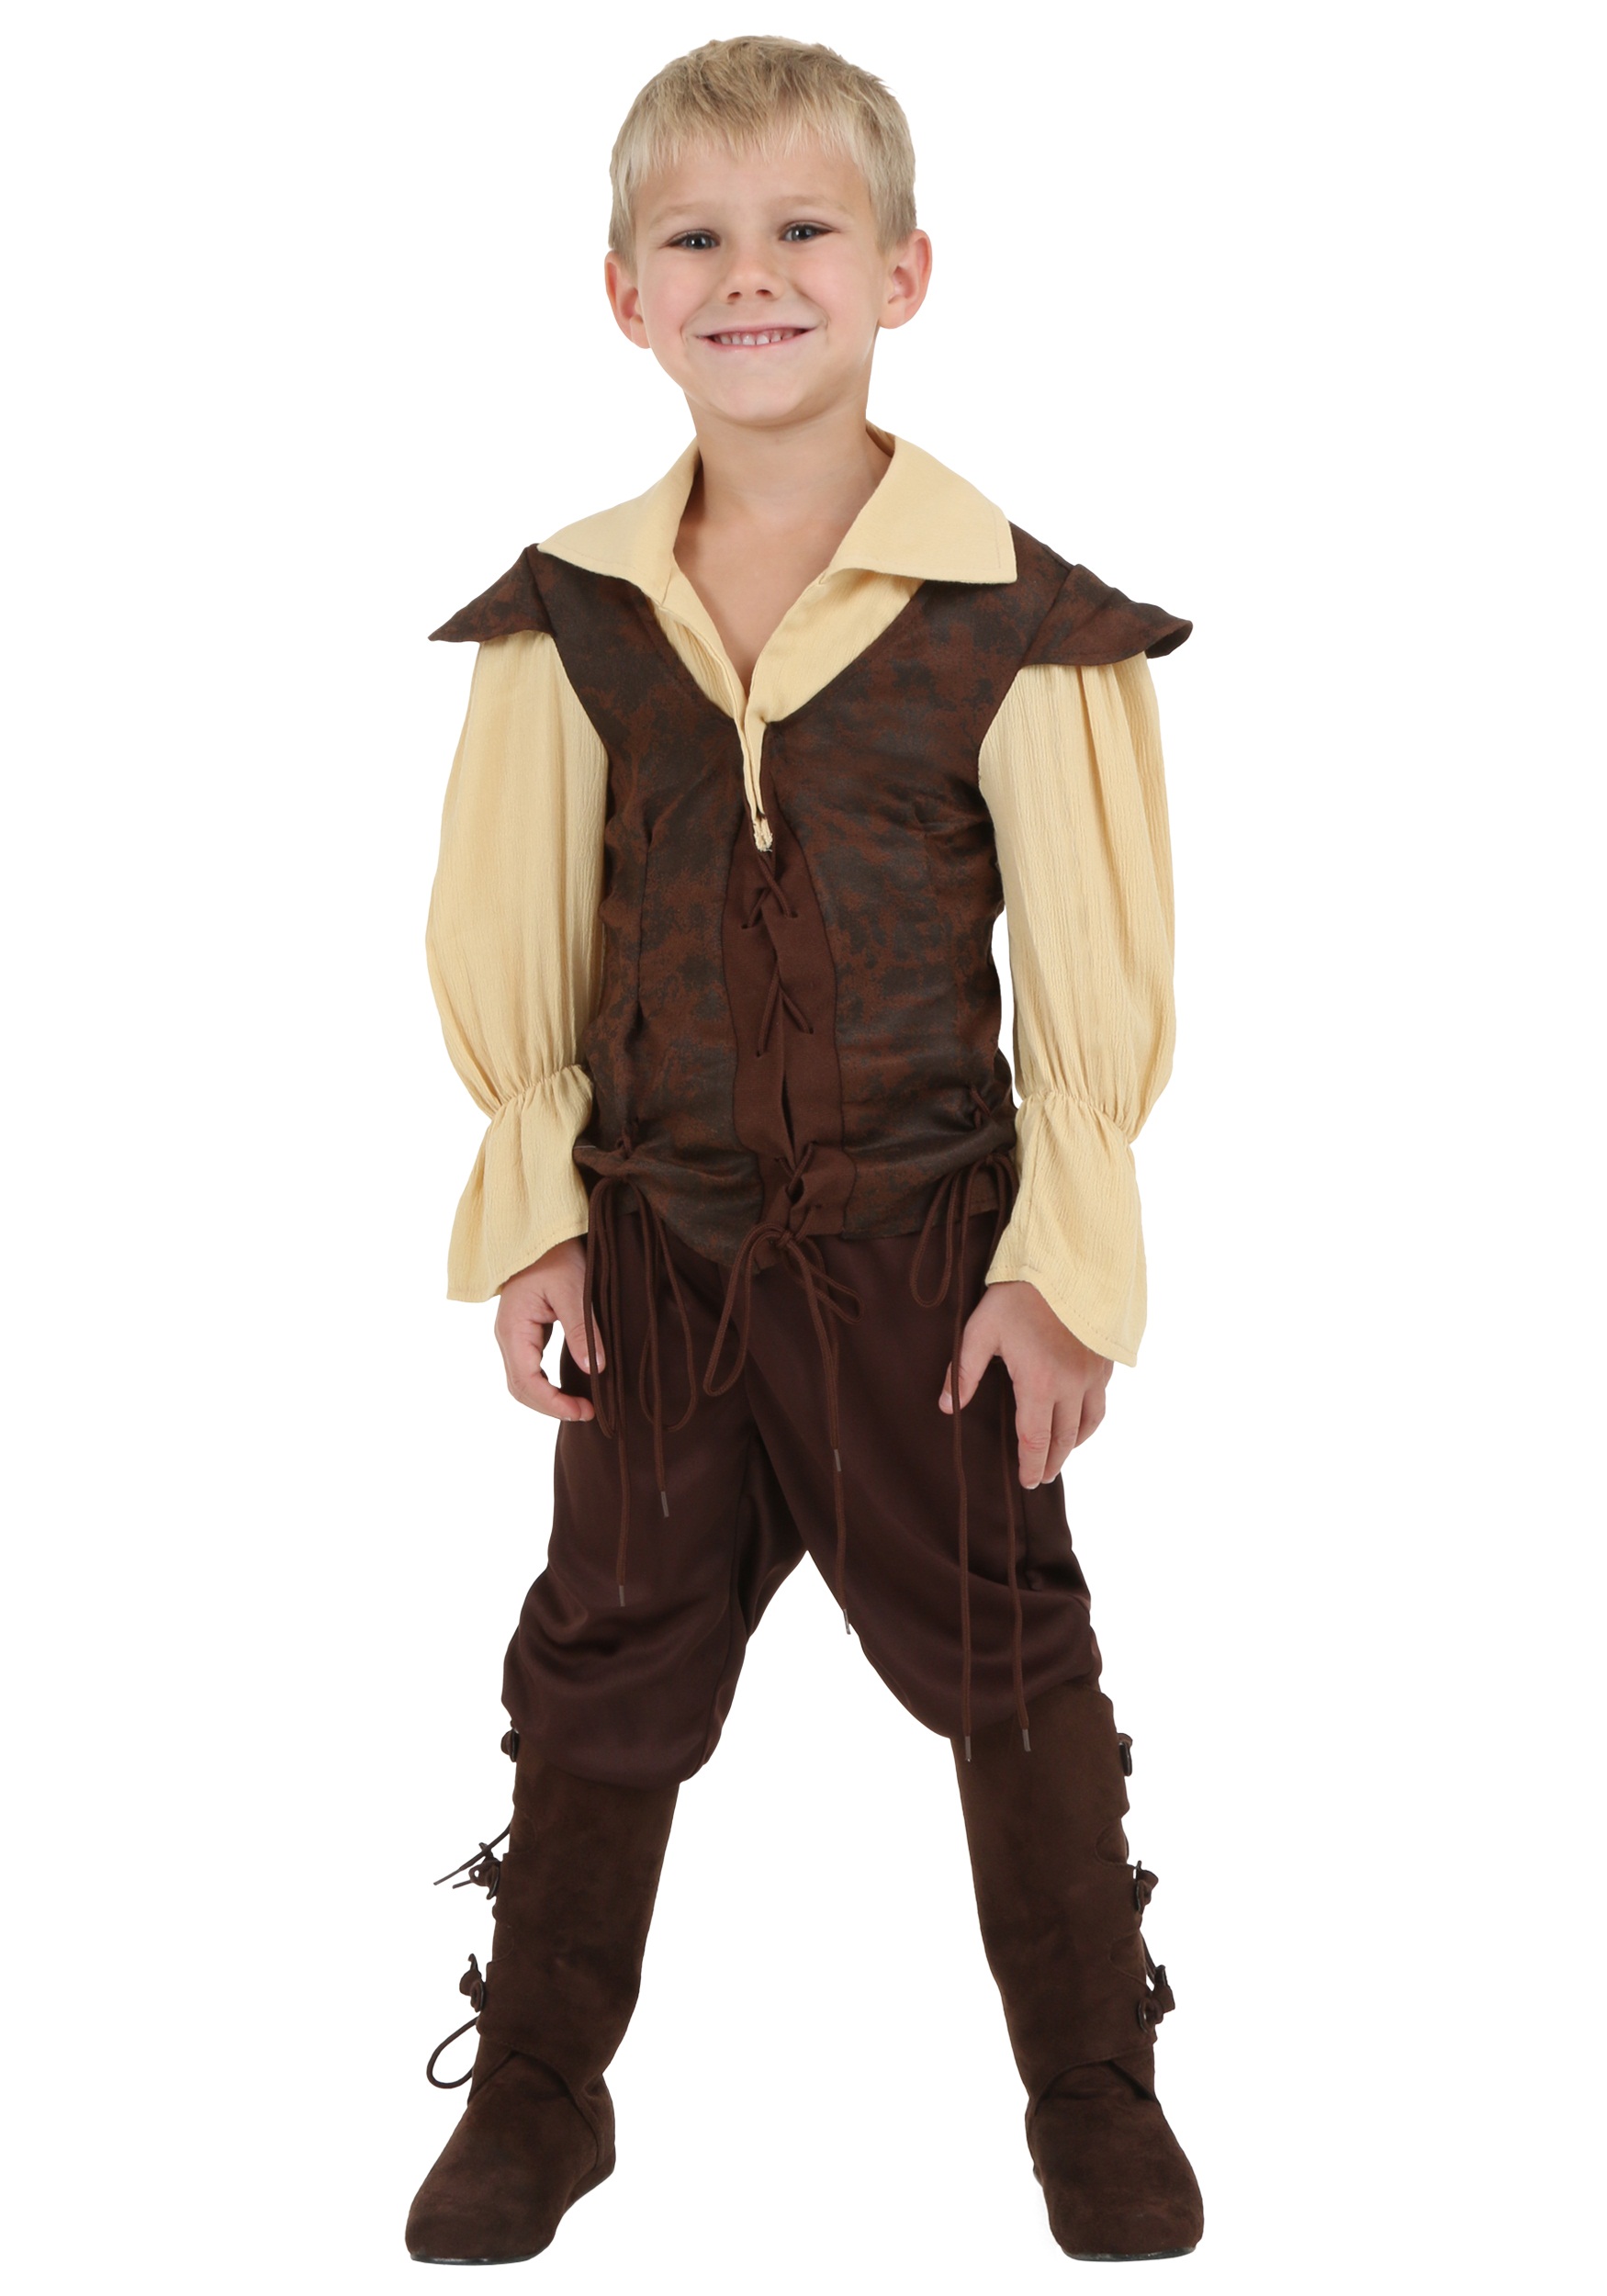 Boys Renaissance Man Costume for Toddlers